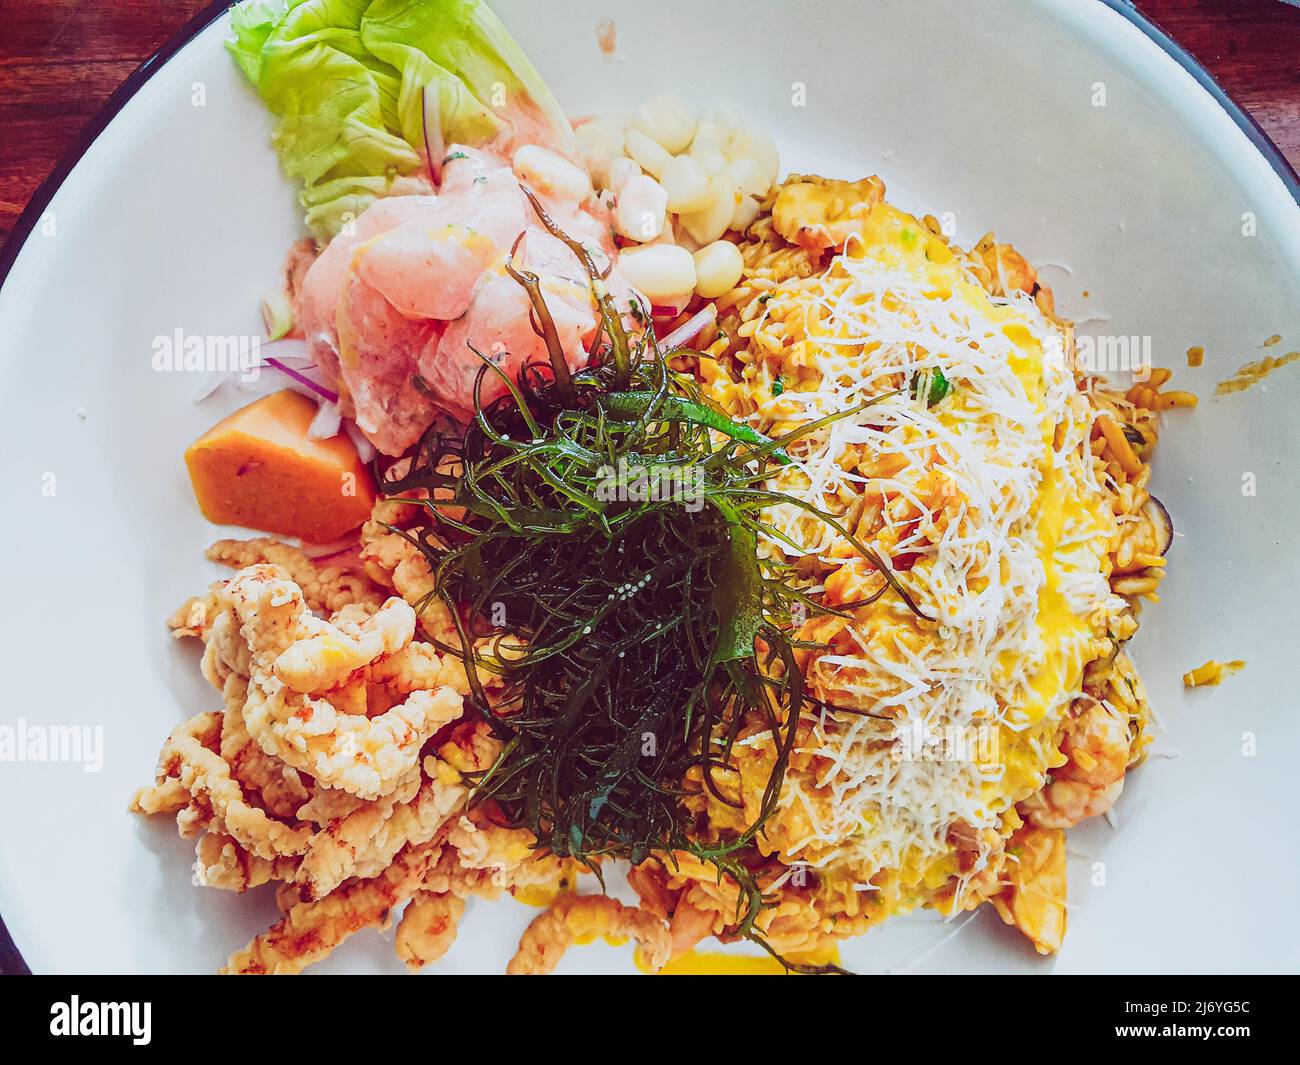 Ceviche with seafood rice and fish chicharron. Peruvian food, seafood trio Stock Photo